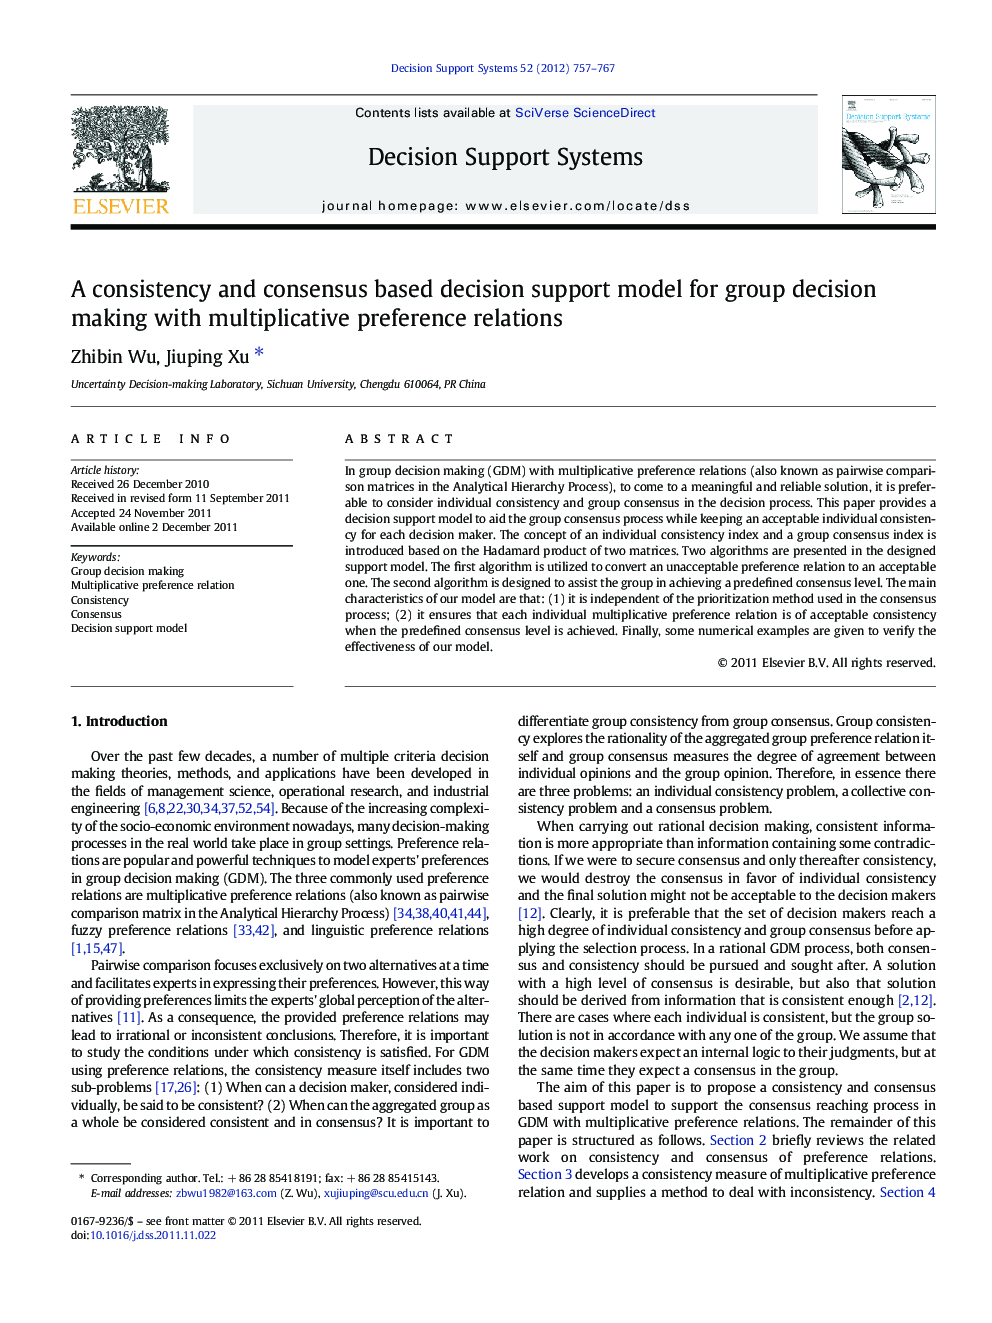 A consistency and consensus based decision support model for group decision making with multiplicative preference relations